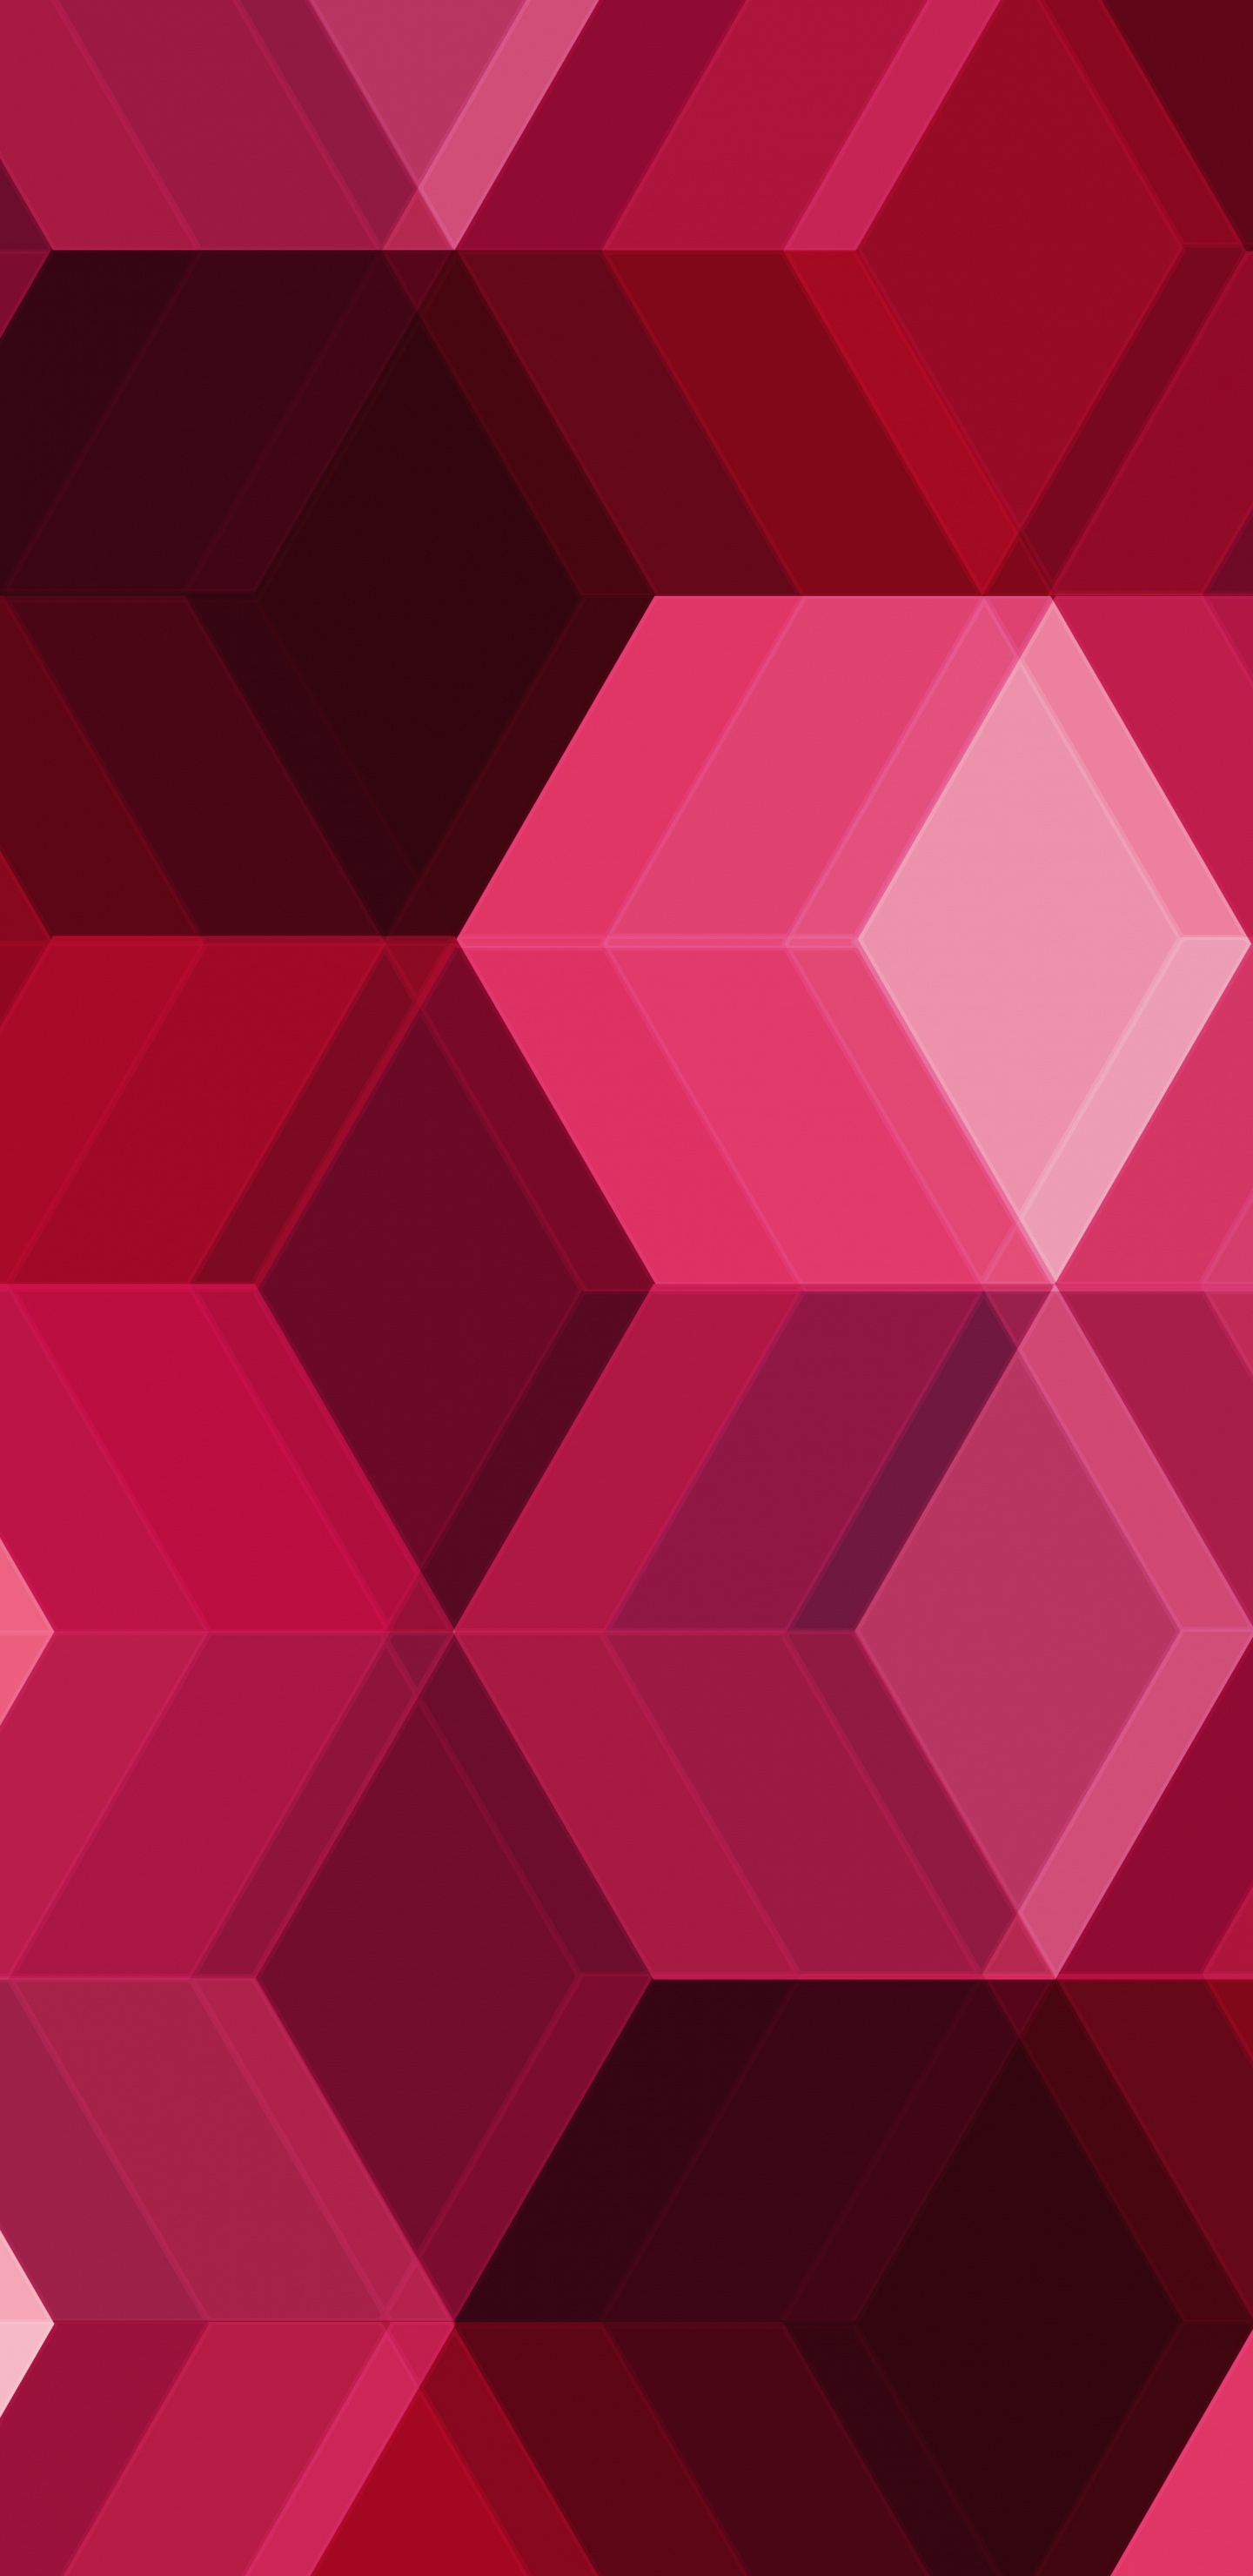 Red and White Checkered Textile. Wallpaper in 1440x2960 Resolution